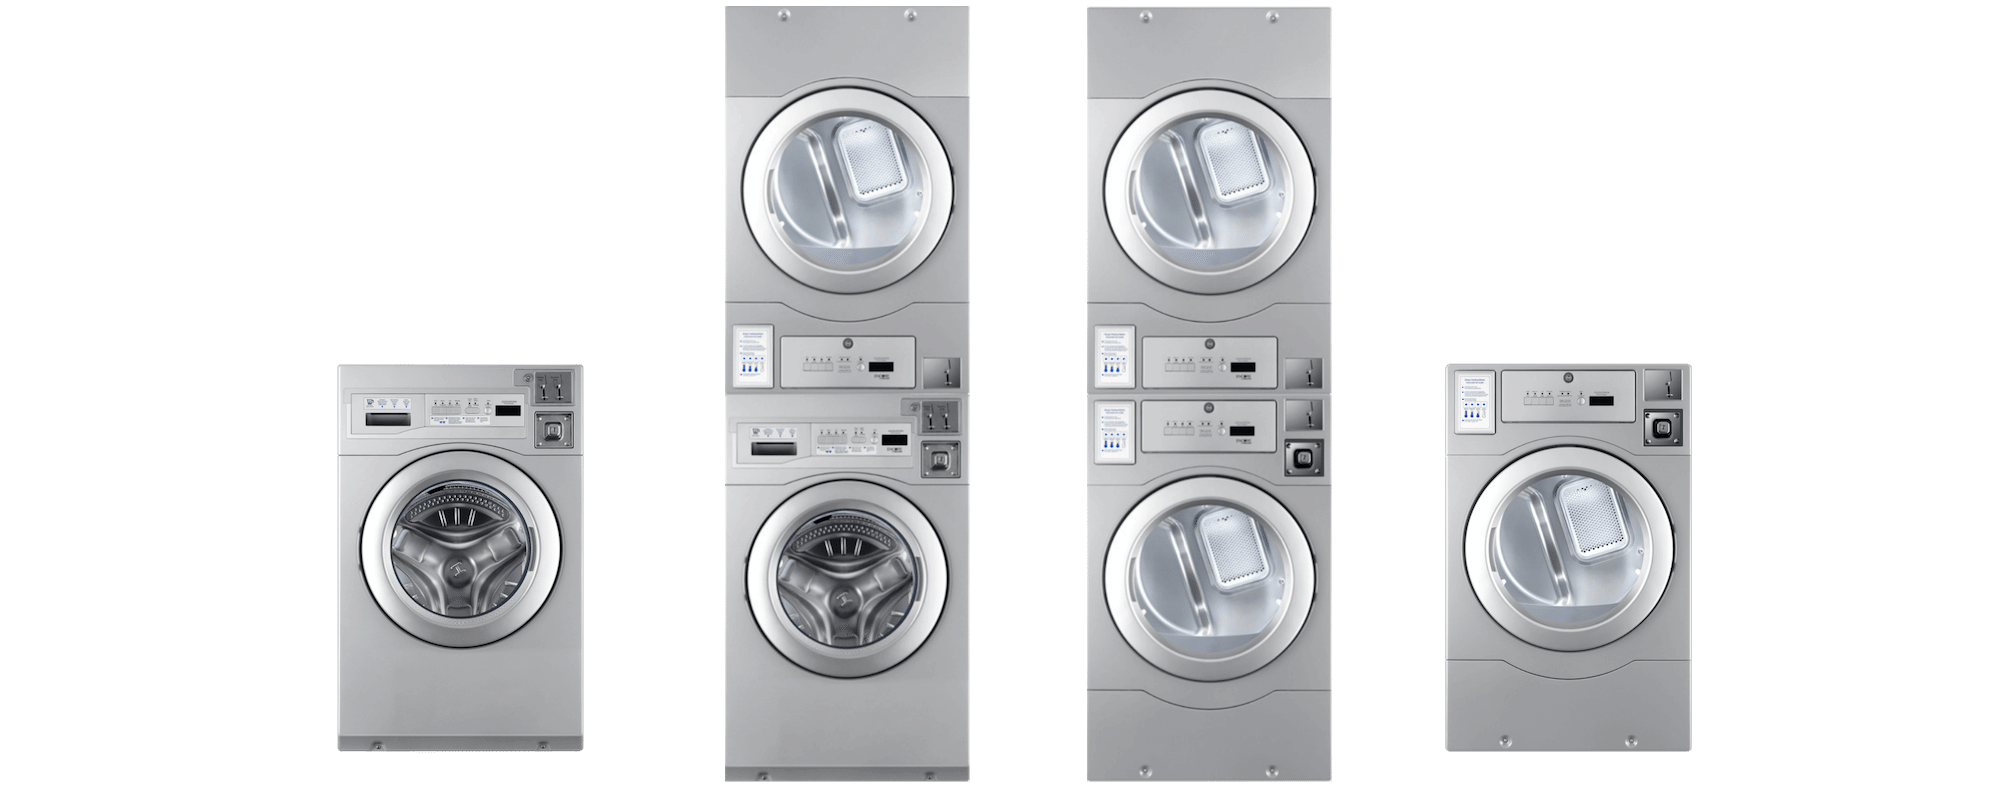 Encore by Wascomat semi-professional washers and dryers sold by All Season Commercial Laundry Repair, Montana's Electrolux and Wascomatcoin and on-premises laundry equipment distributor and commercial laundry parts and repair service provider.